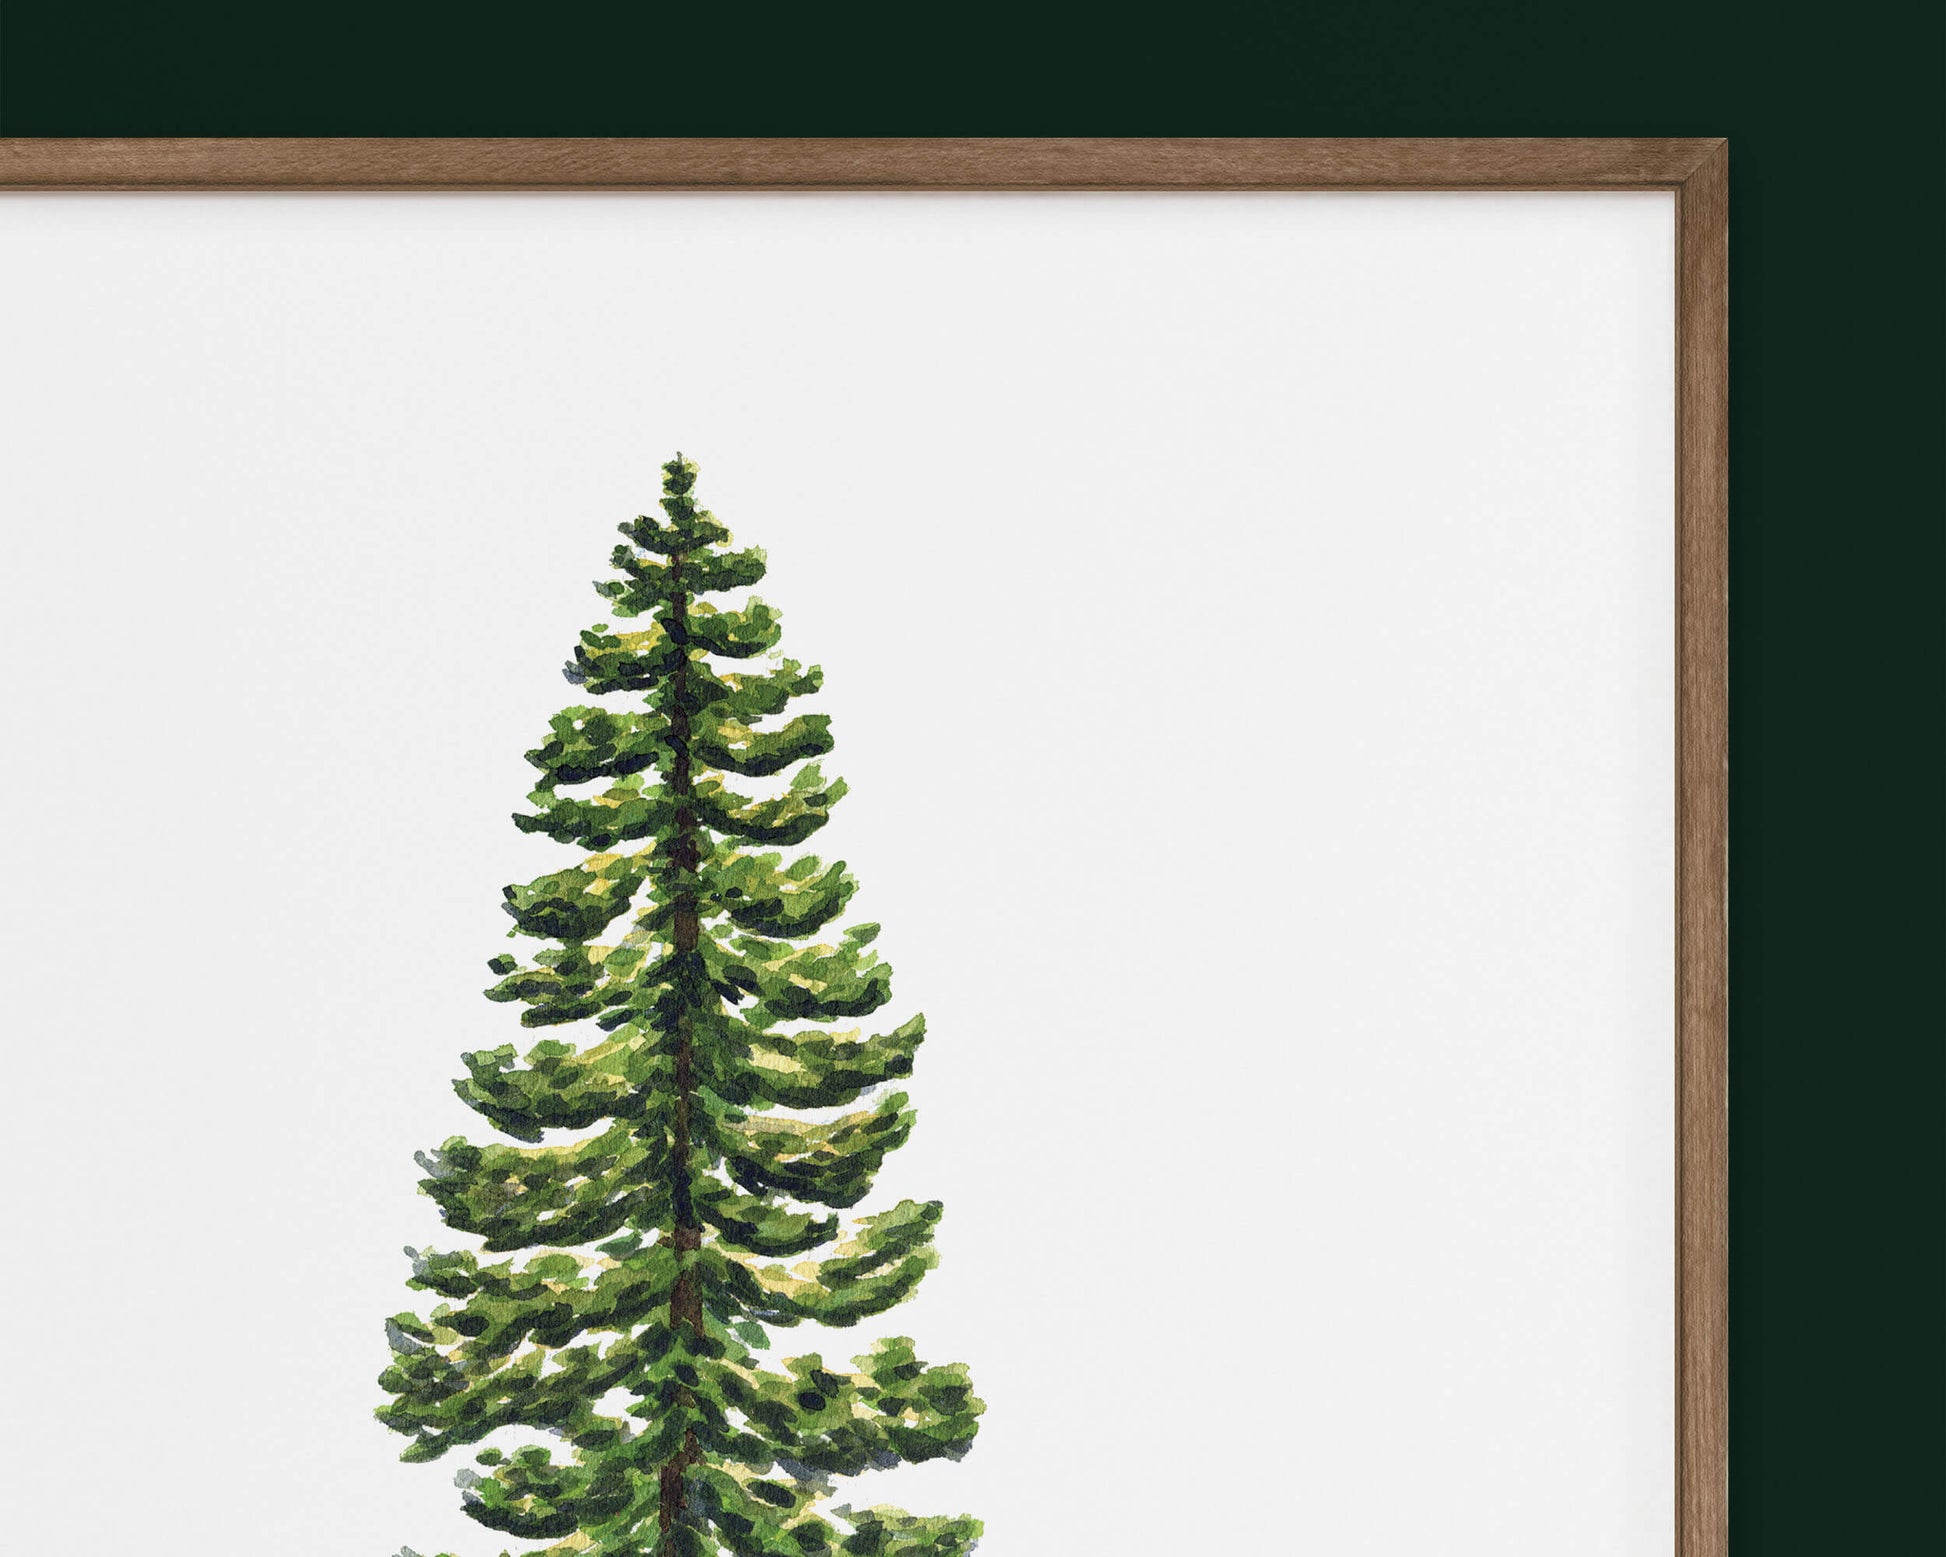 a close up picture of a pine tree in a frame